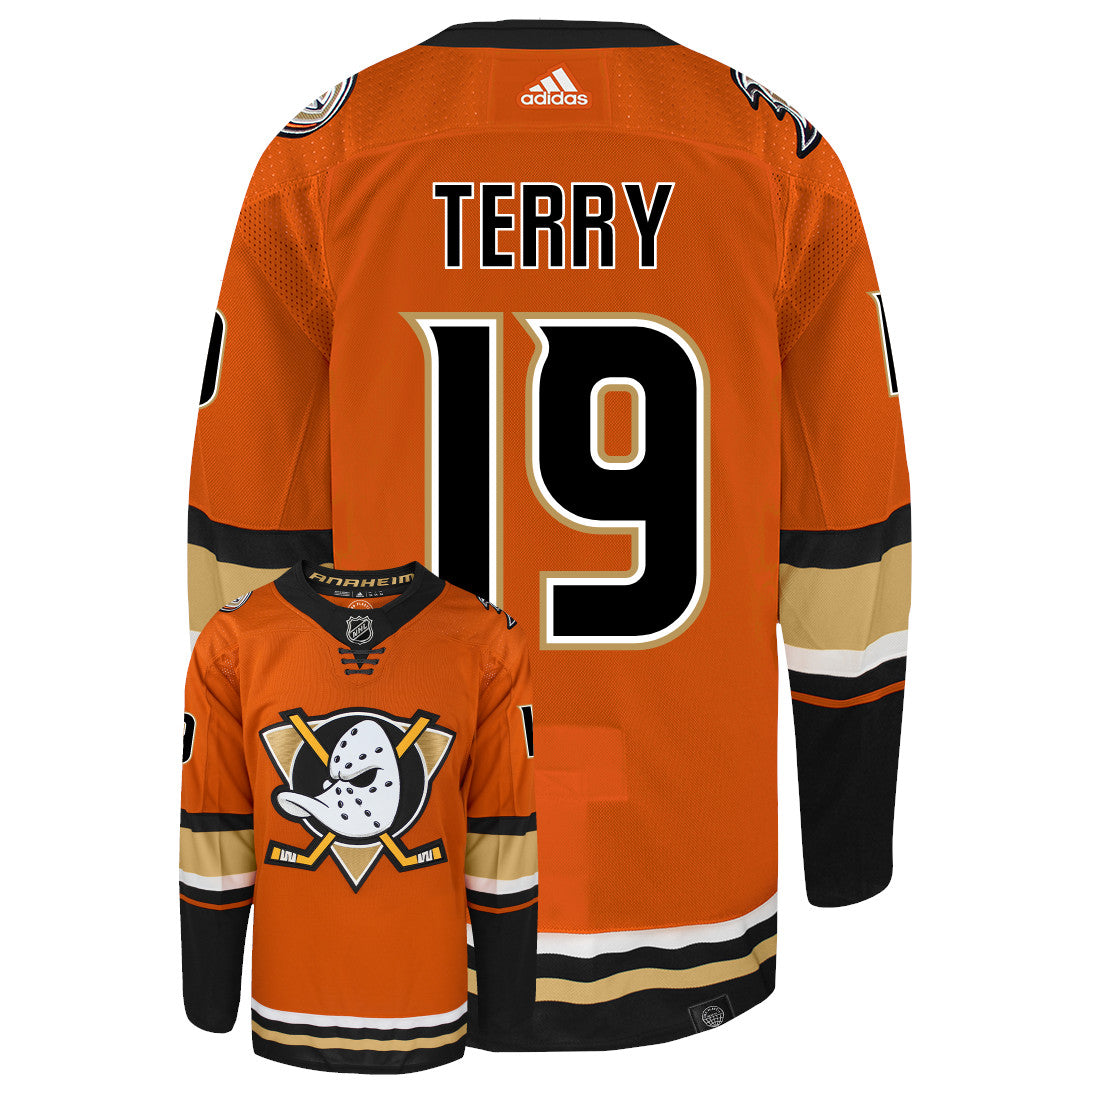 Troy Terry Anaheim Ducks Adidas Primegreen Authentic Third Alternate NHL Hockey Jersey - Back/Front View